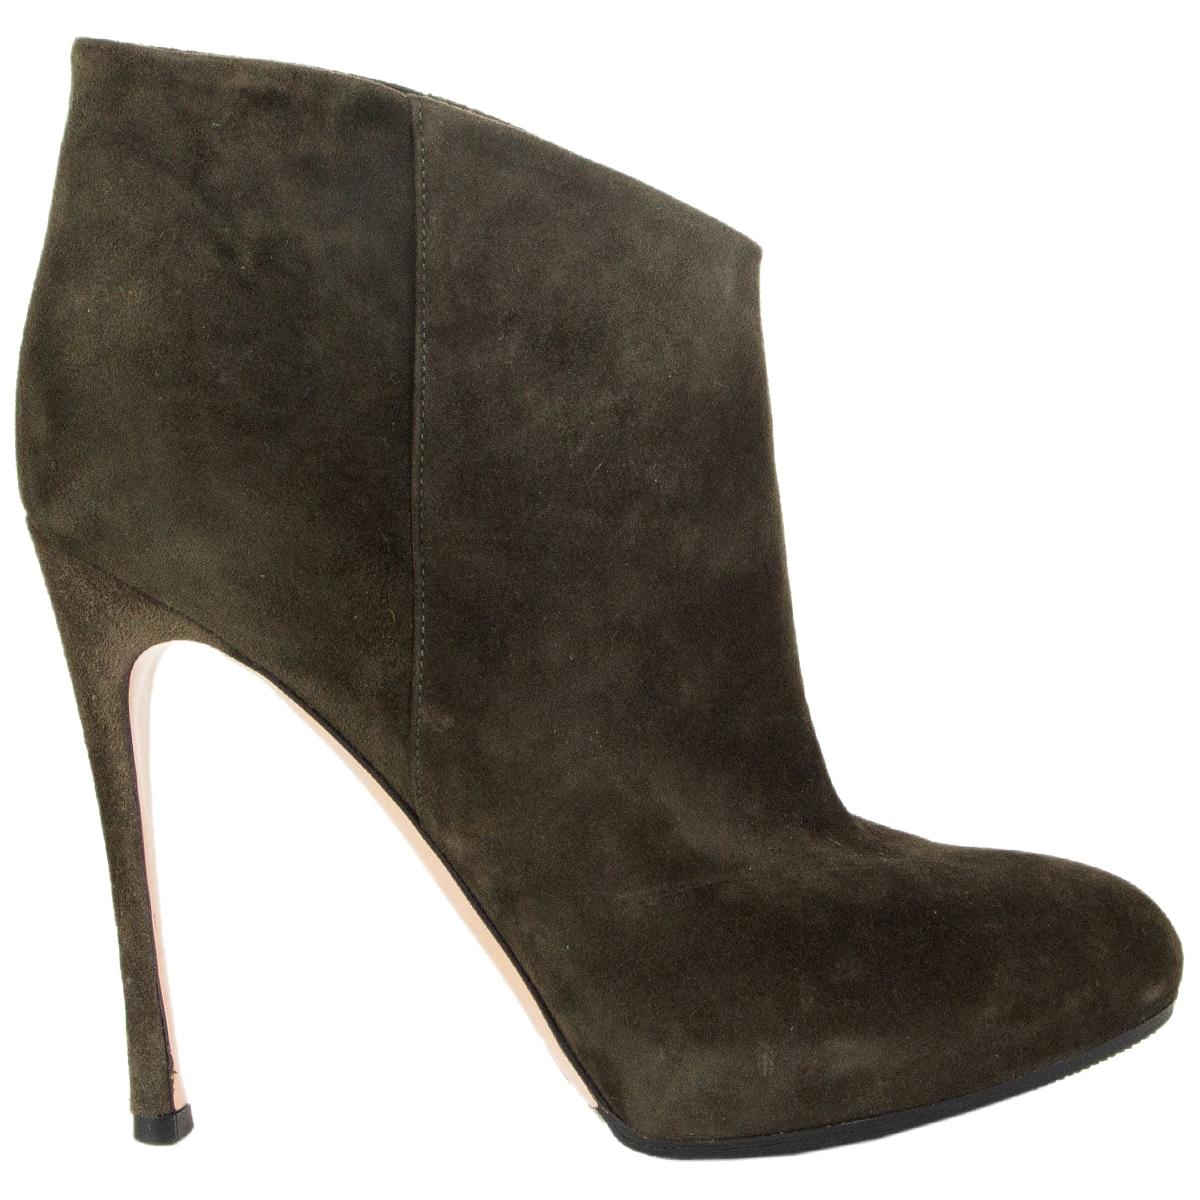 GIANVITO ROSSI Army green suede STILETTO PLATFORM Ankle Boots Shoes 38